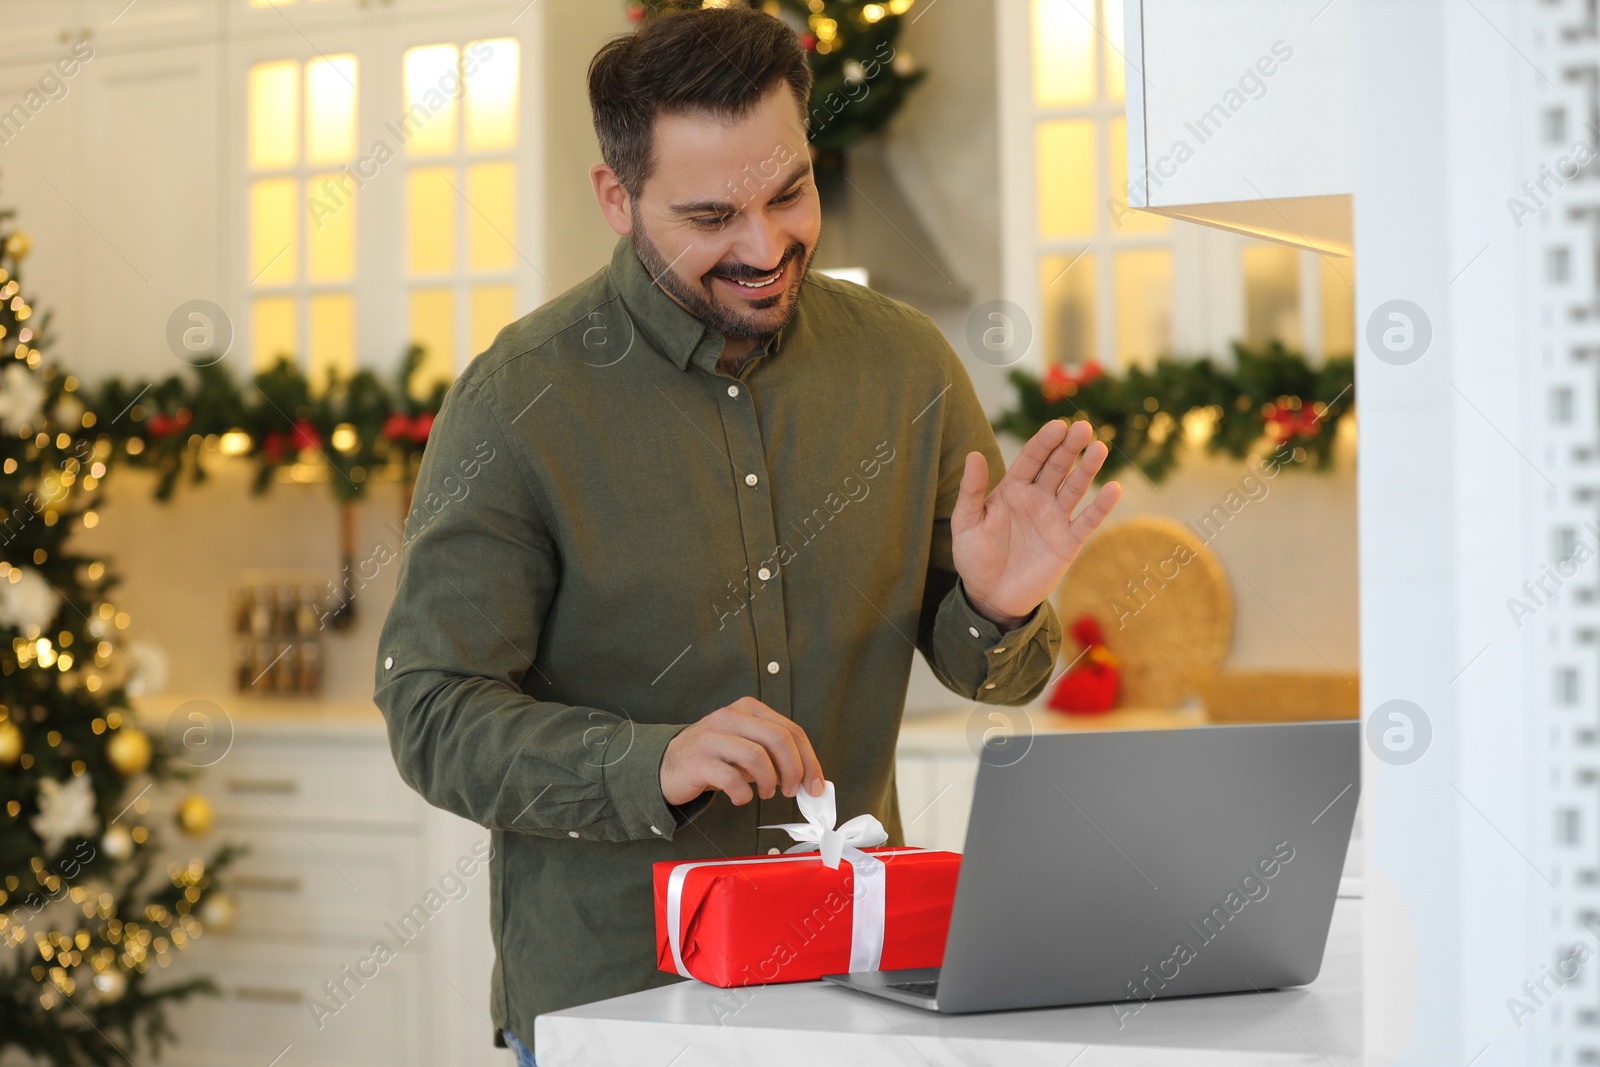 Photo of Celebrating Christmas online with exchanged by mail presents. Happy man opening gift box during video call on laptop in kitchen